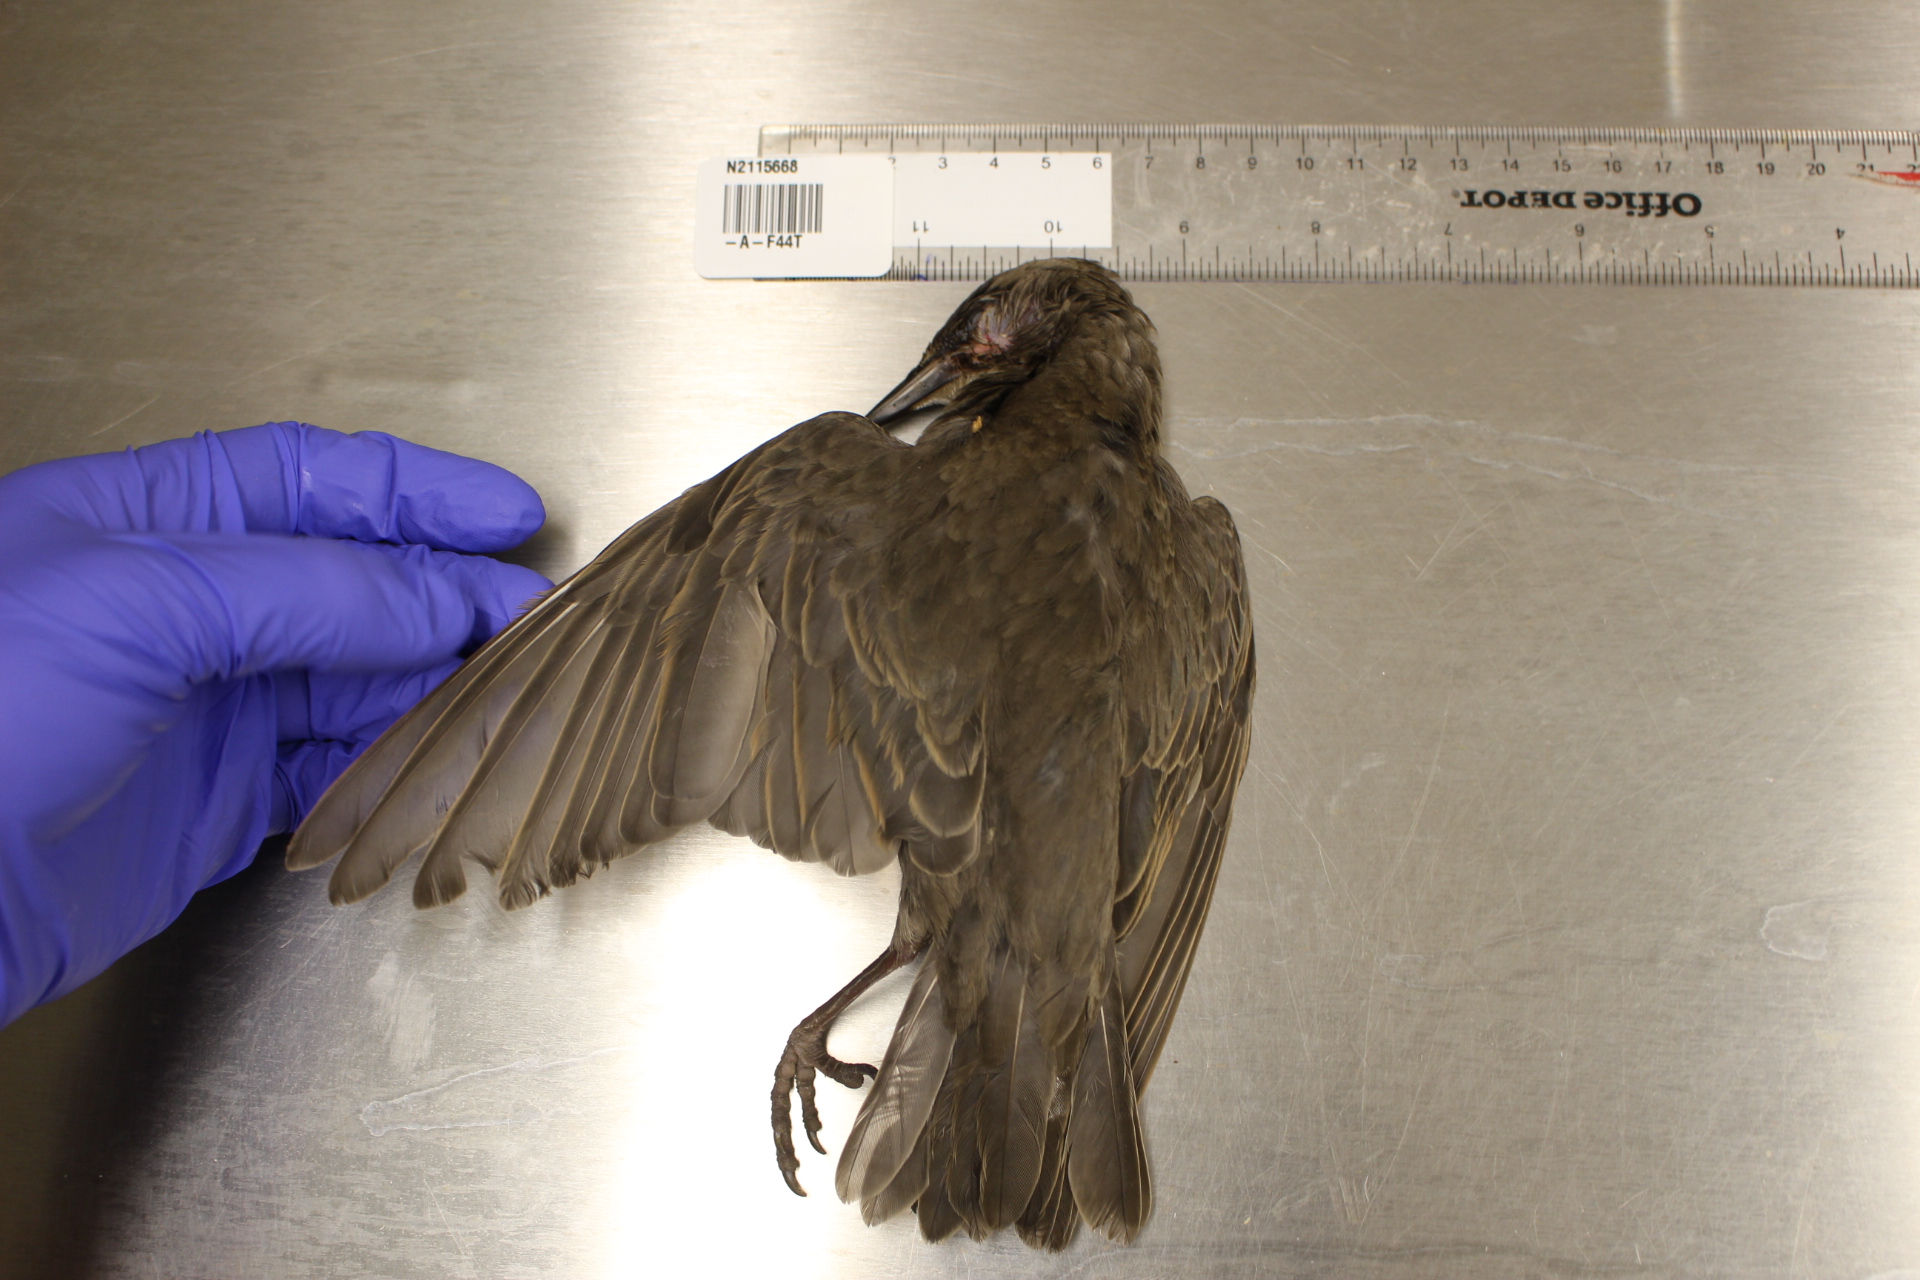 The wing of a dead starling is held in a gloved hand and measured